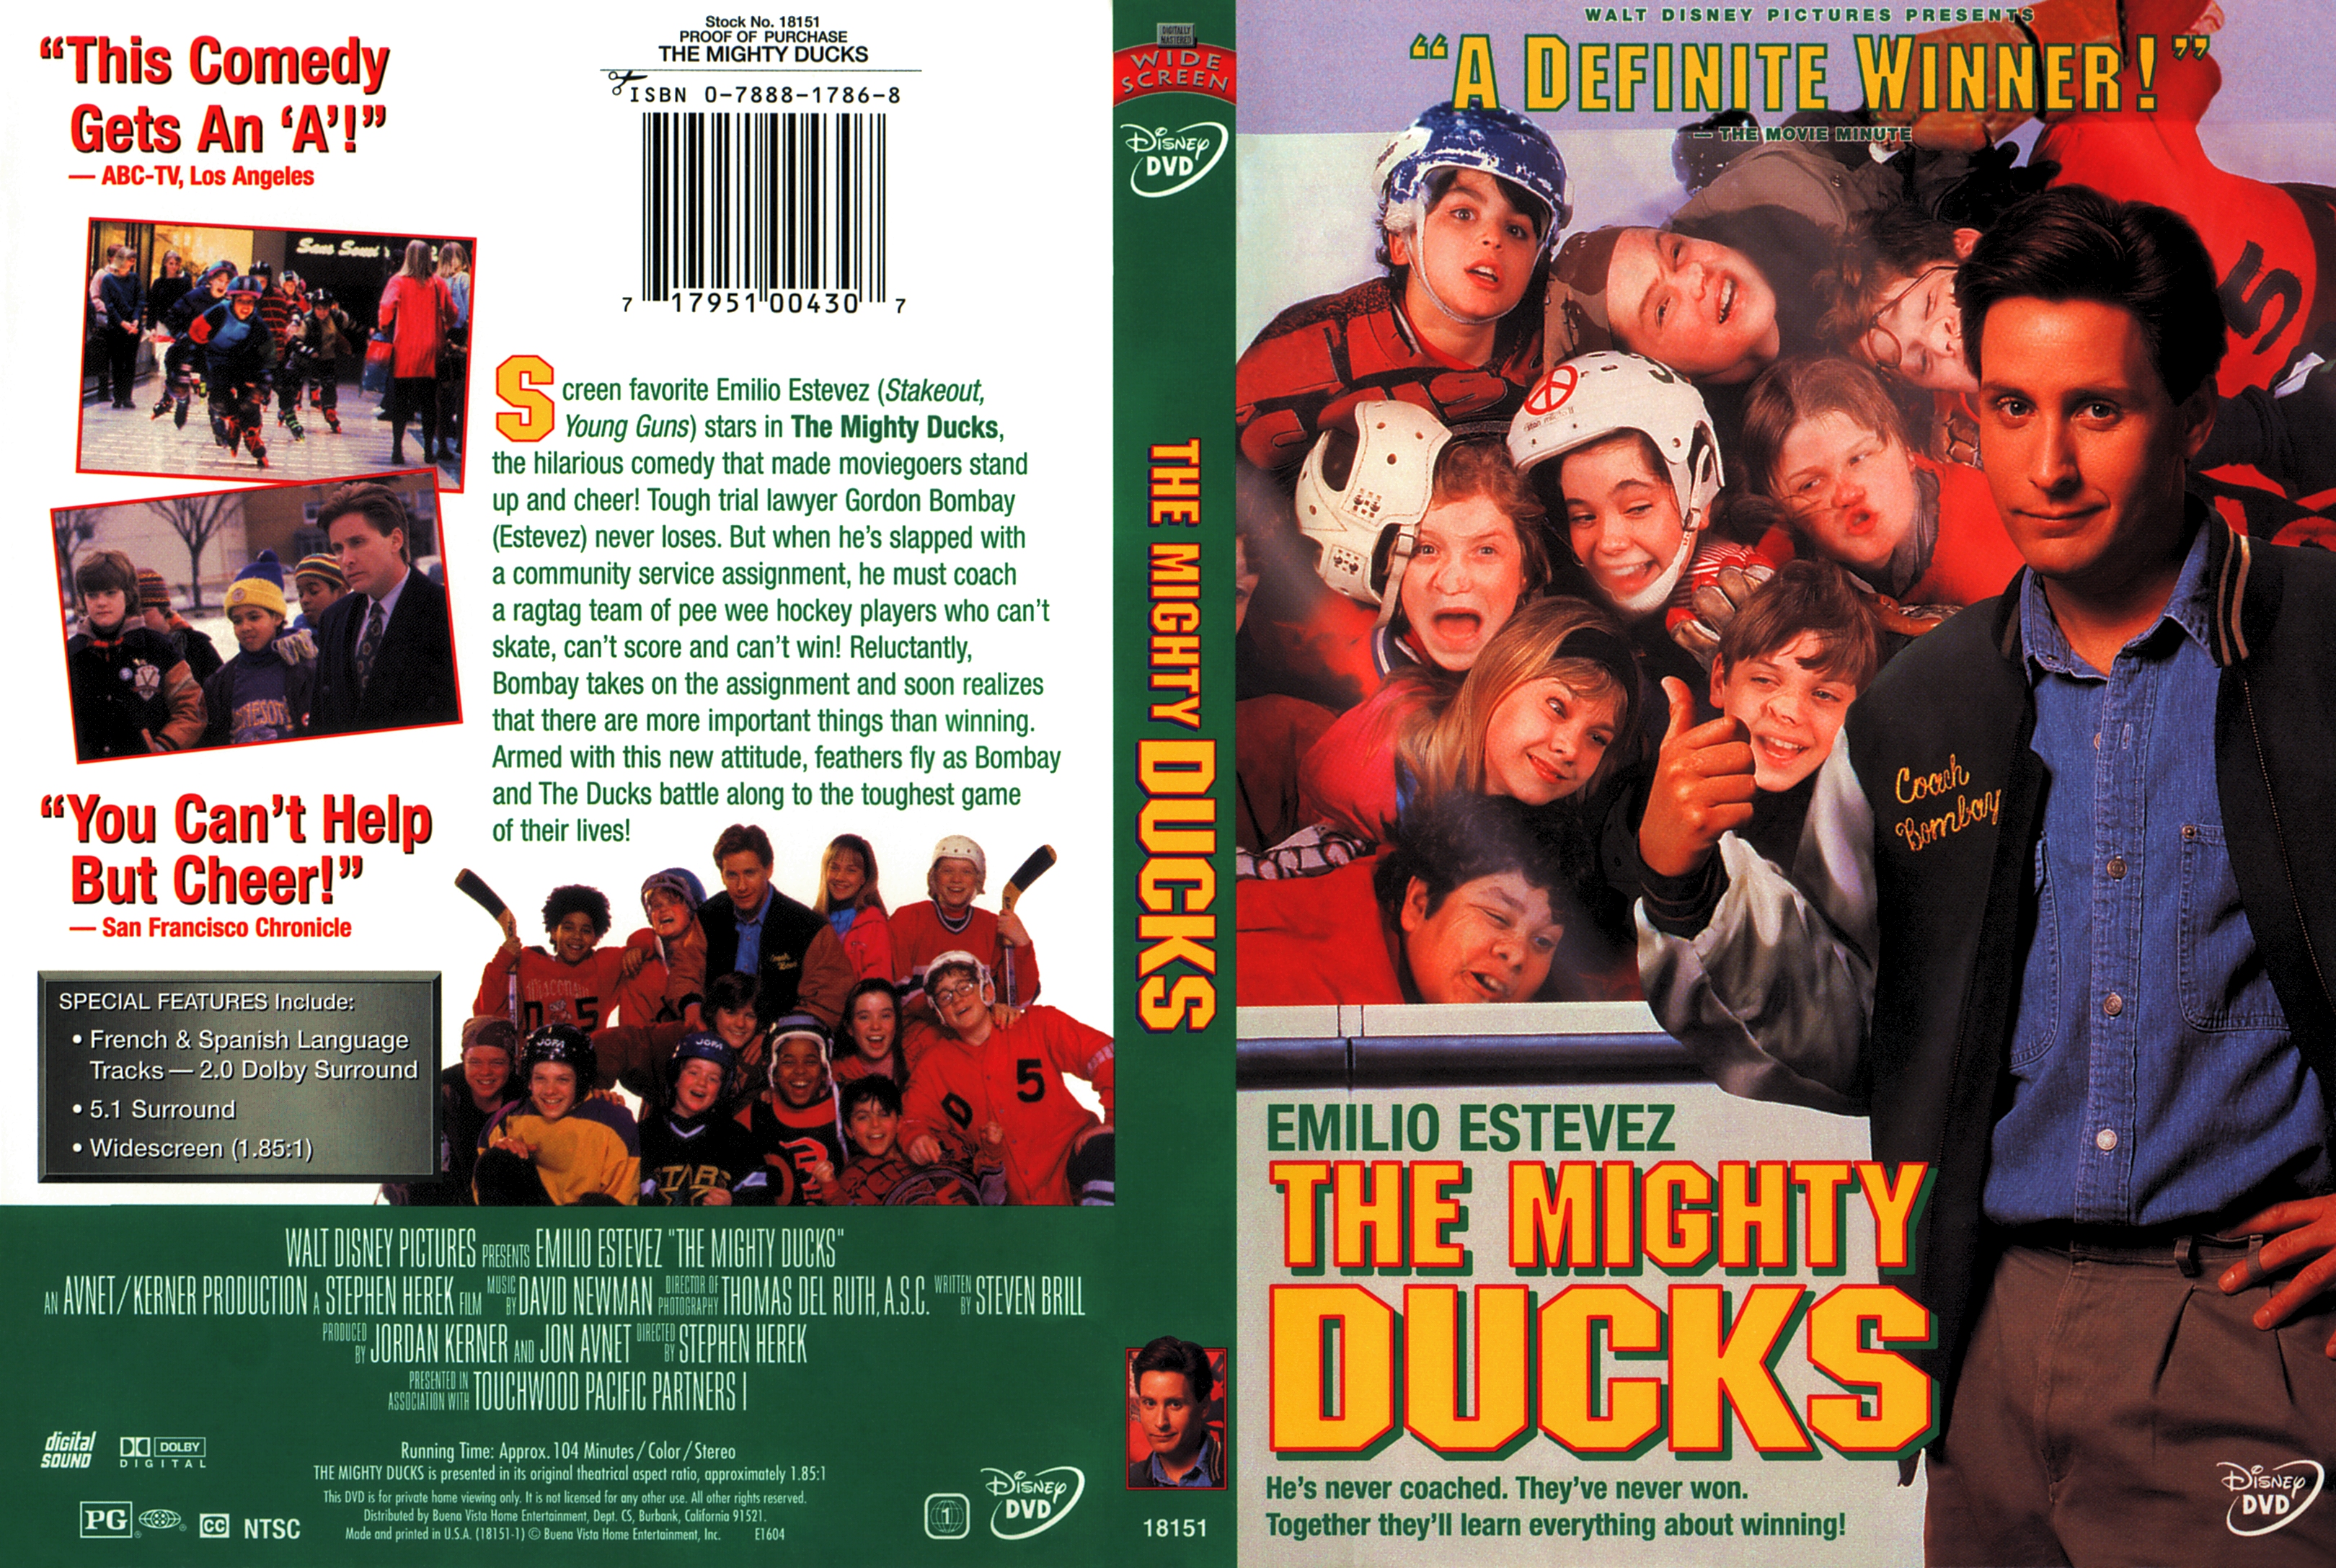 The Mighty Ducks DVD Box Set (dvd), Other